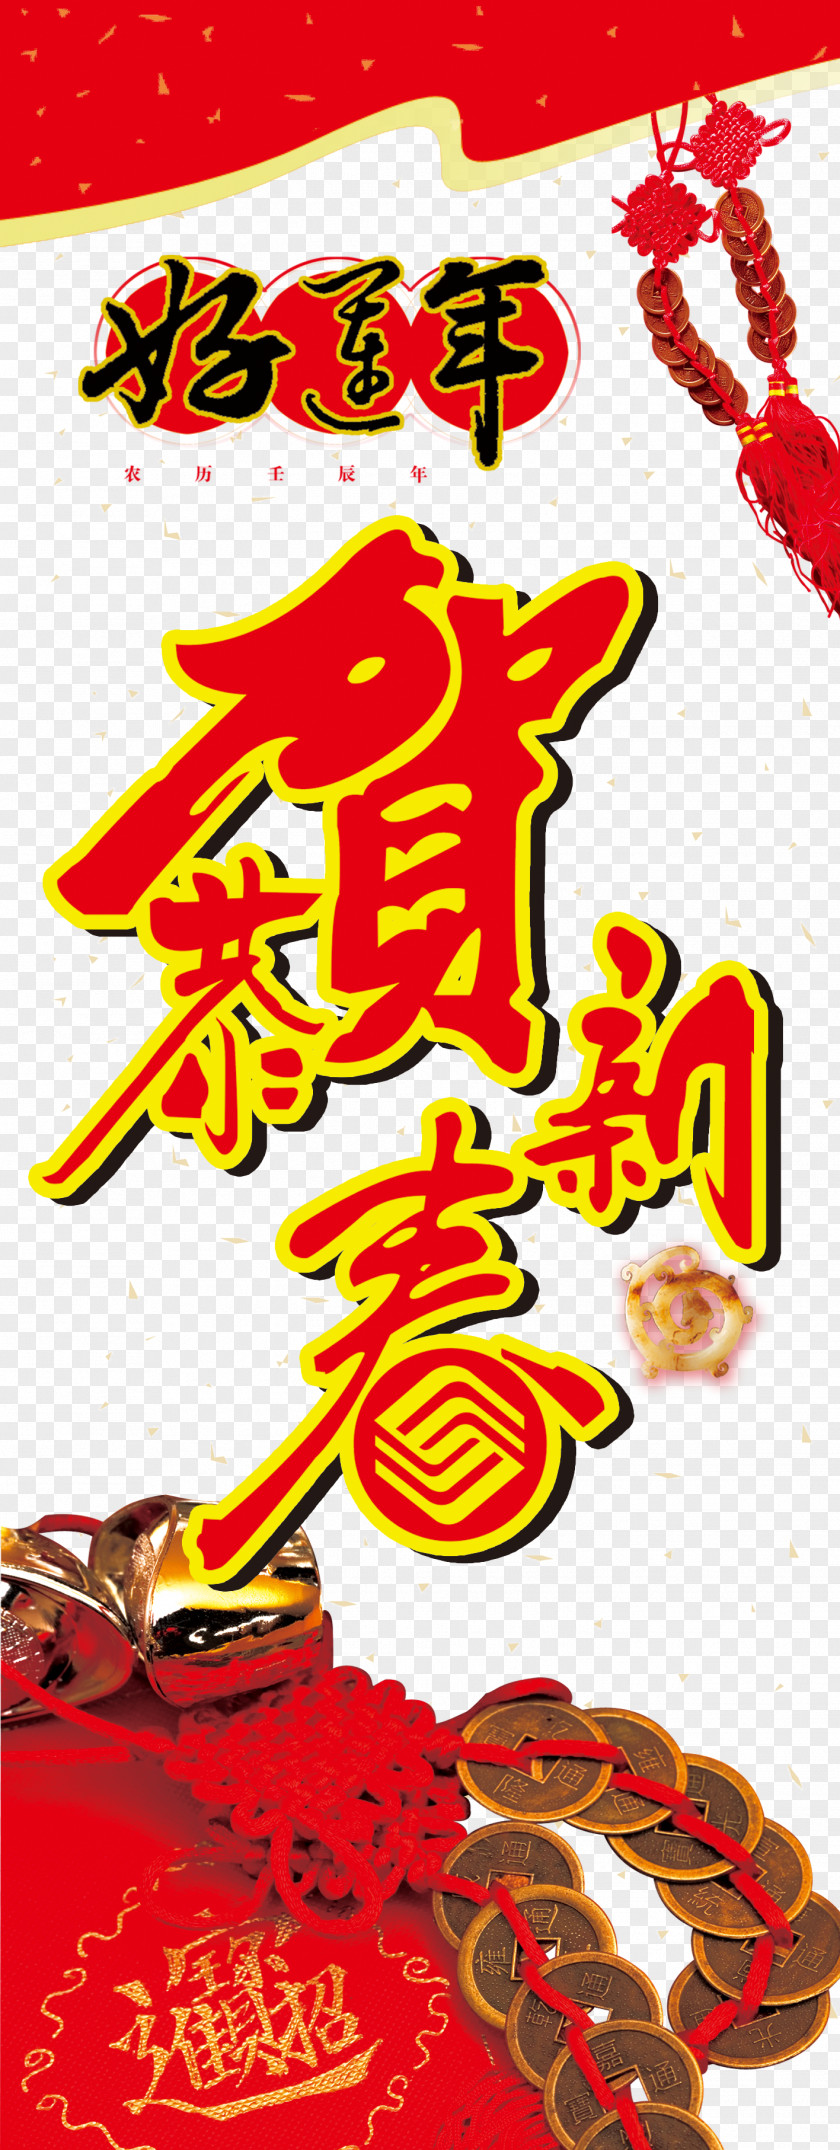 Chinese New Year Lunar Good Luck Poster PNG